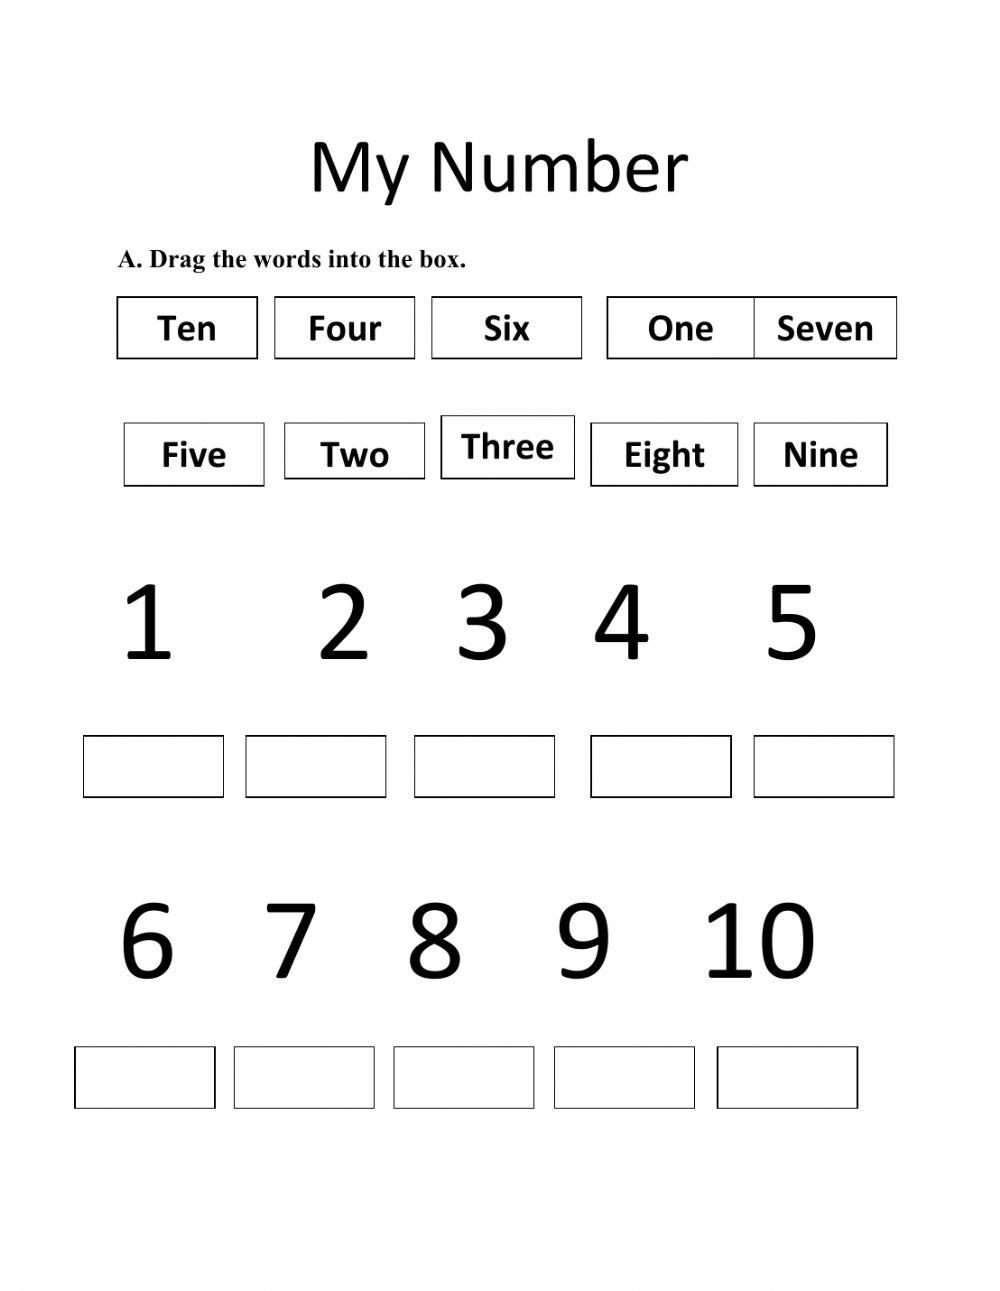 Number in words